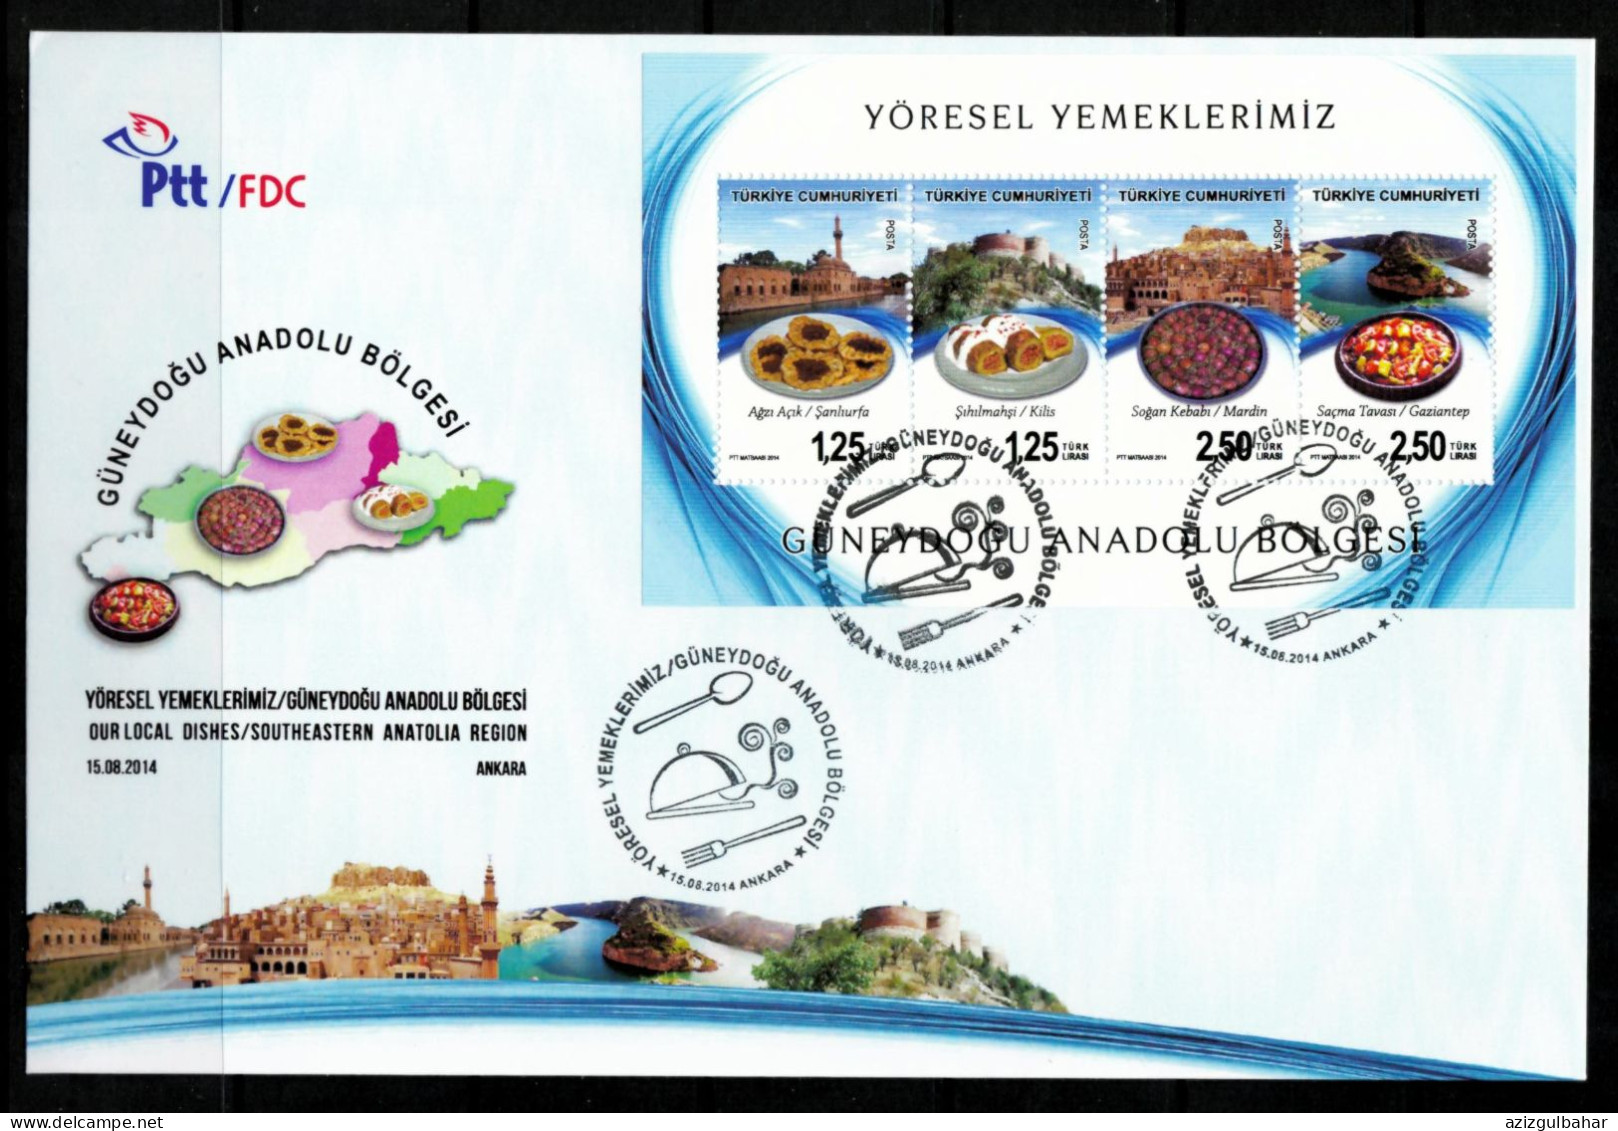 TURKEY - 2014 - OUR LOCAL DISHES - FOOD -  15 AUGUST  2014- FDC - FDC